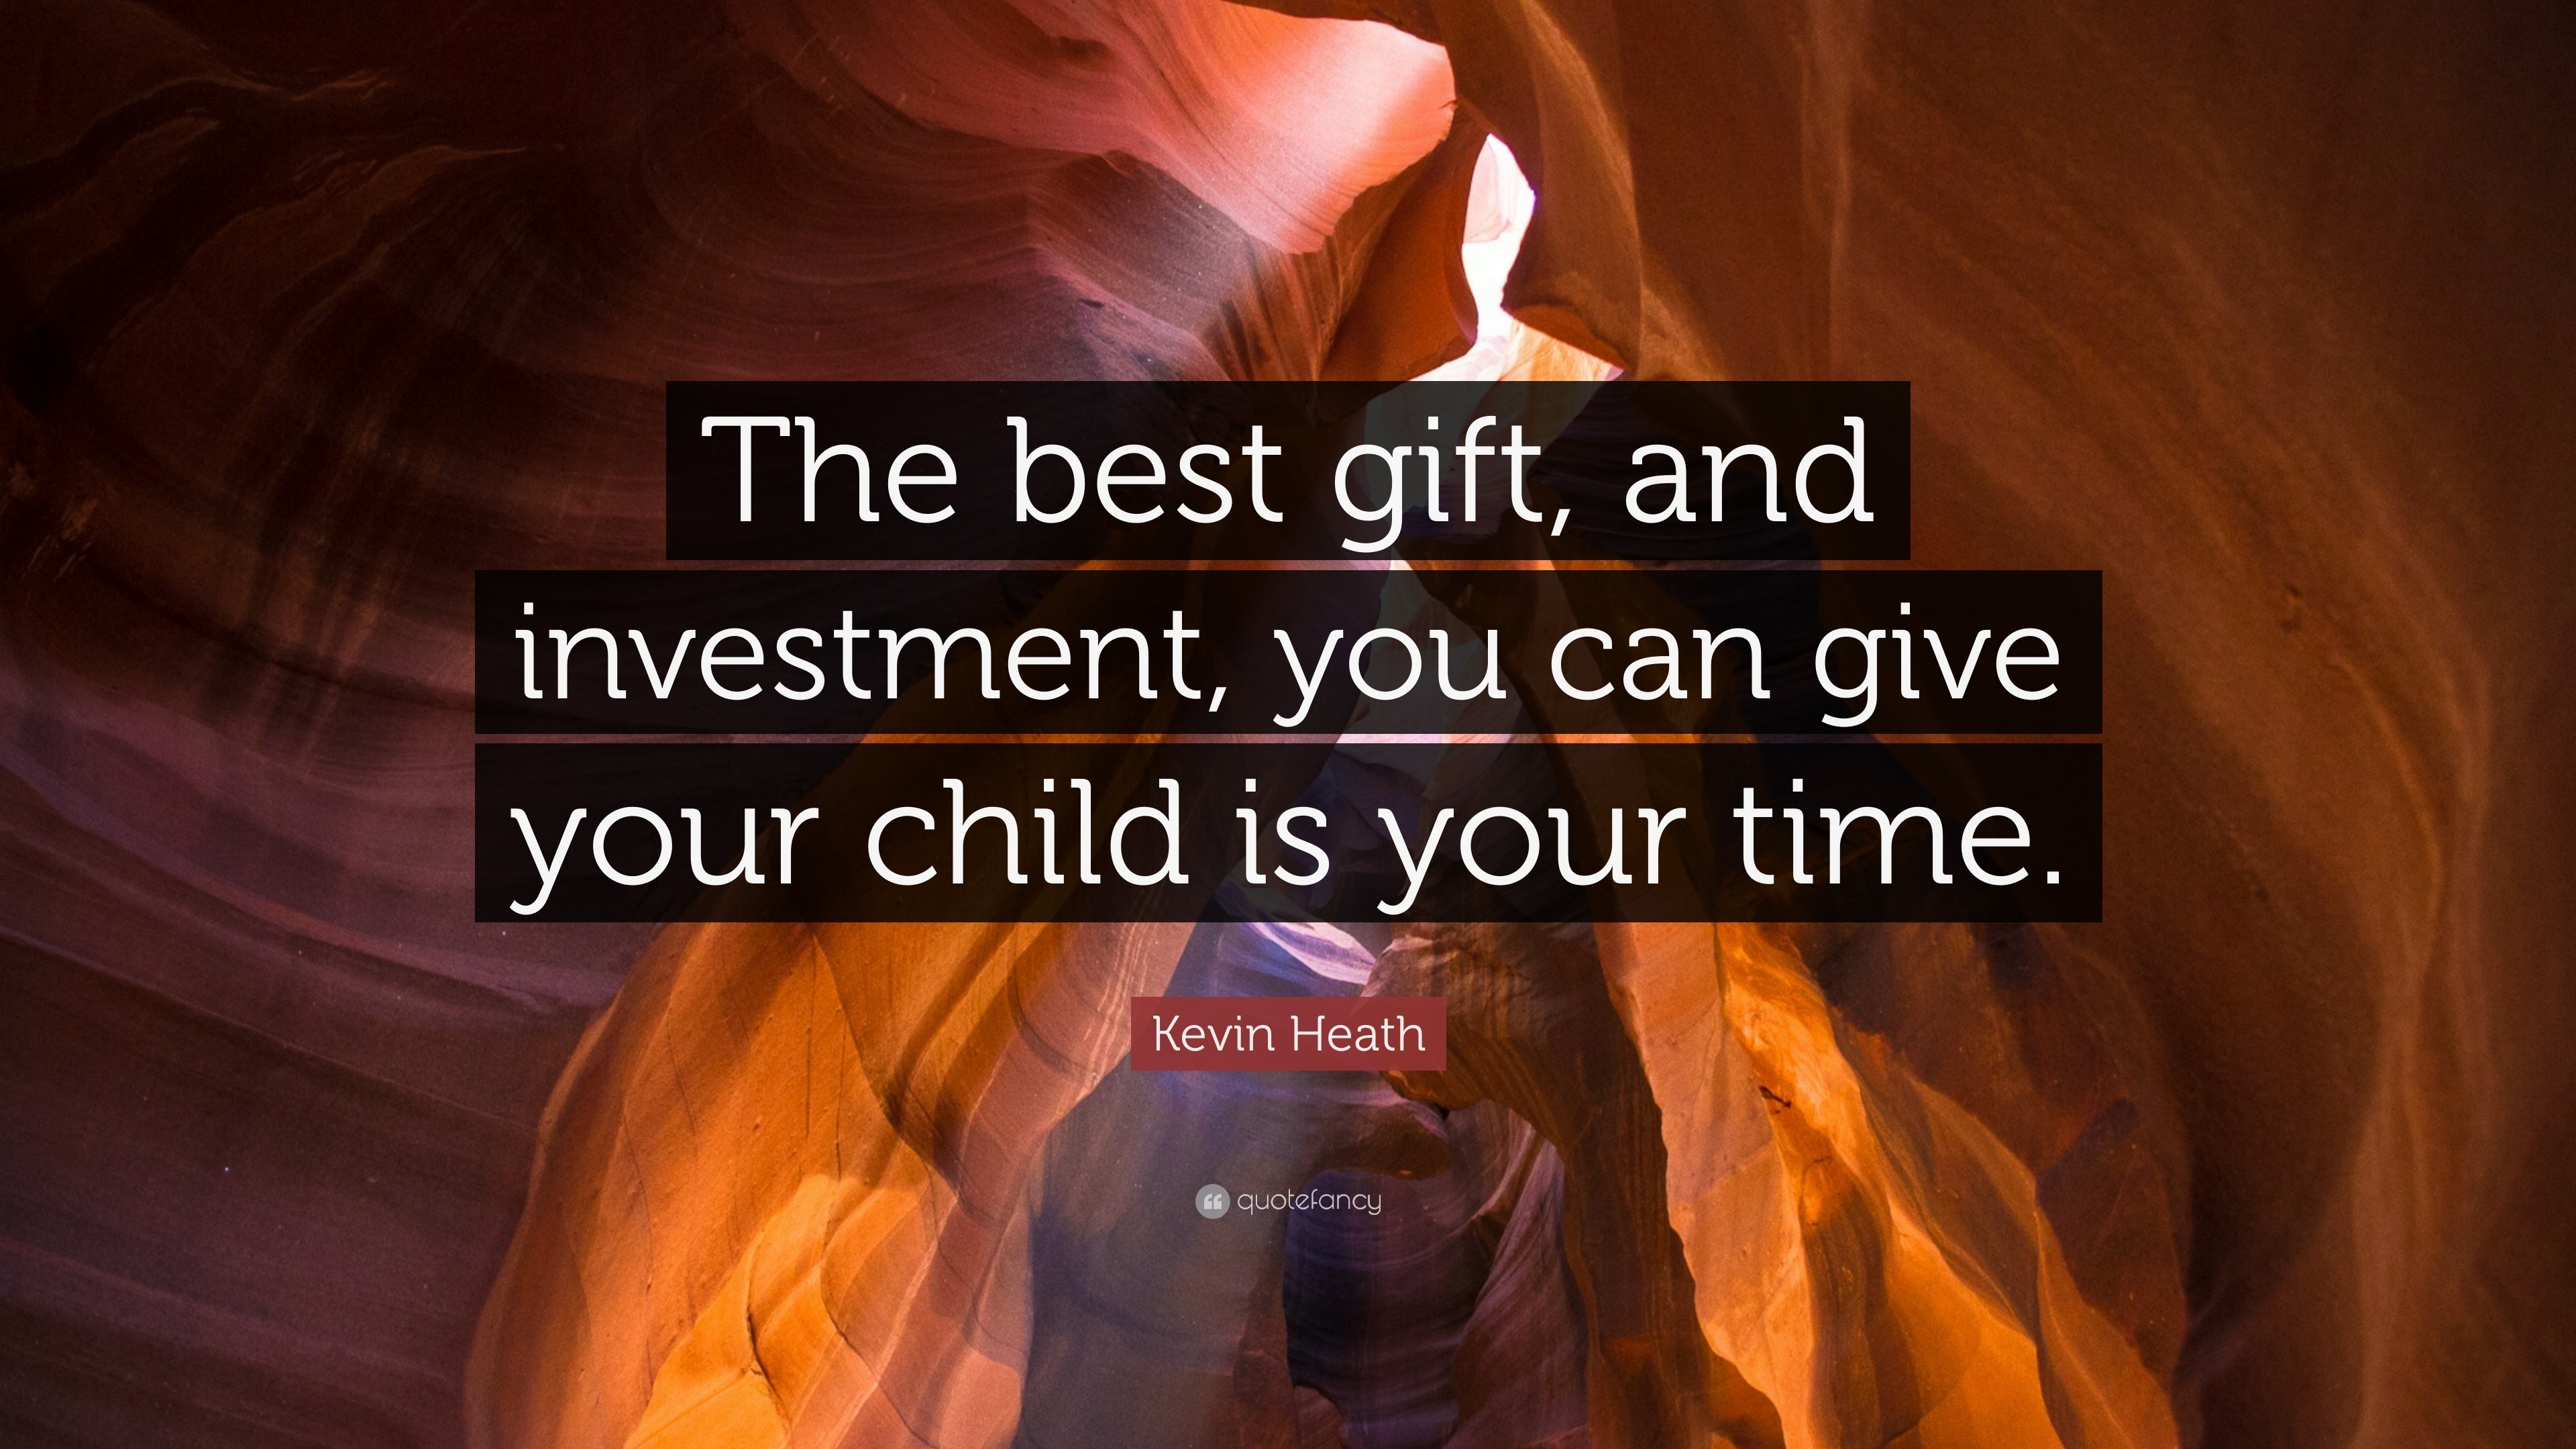 https://quotefancy.com/media/wallpaper/3840x2160/1453826-Kevin-Heath-Quote-The-best-gift-and-investment-you-can-give-your.jpg